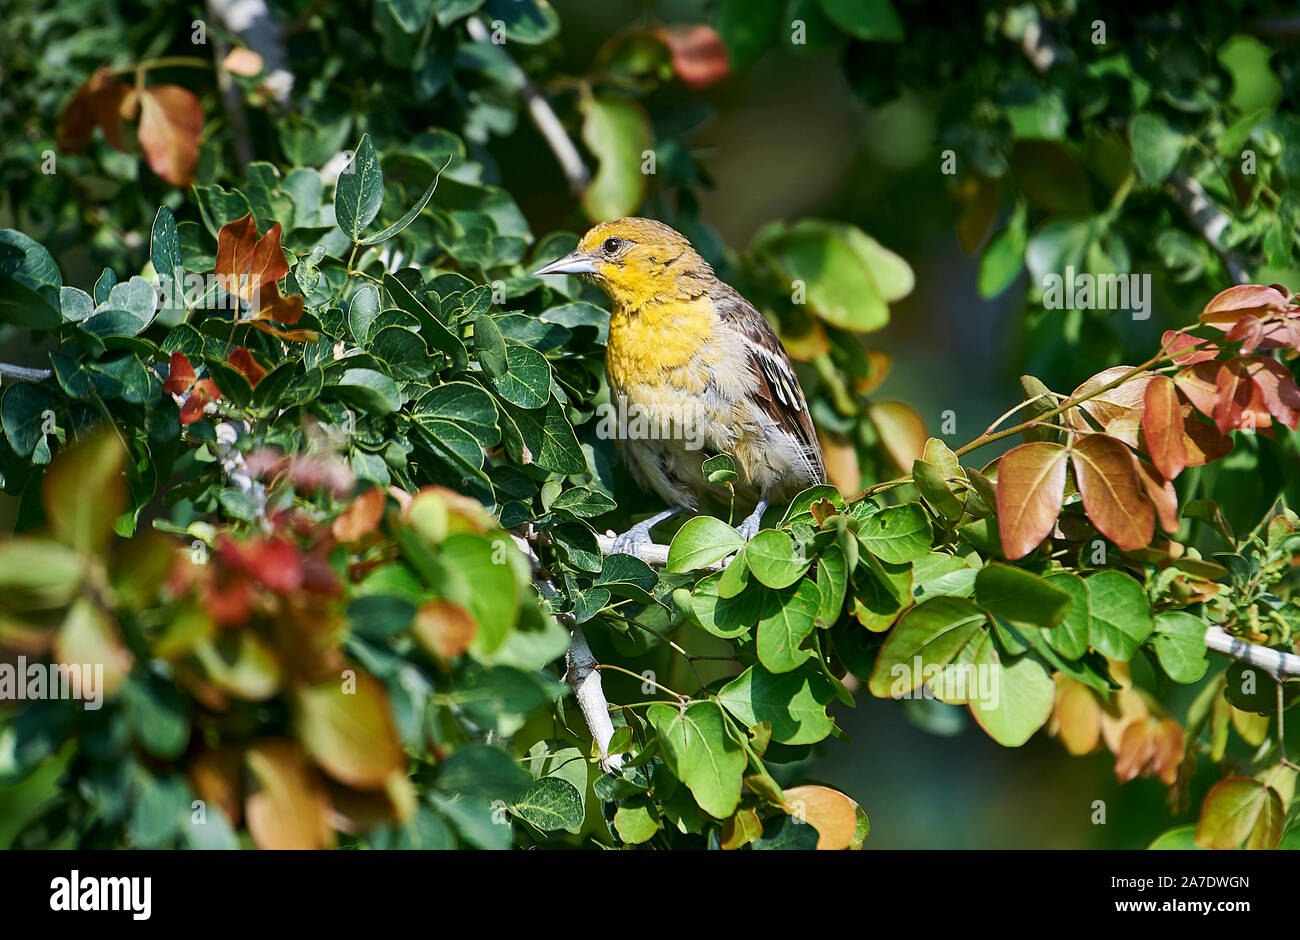 Female Bullock's Oriole (Icterus bullockii) searching for grubs and insects in a tree, Jocotopec, Jalisco, Mexico Stock Photo